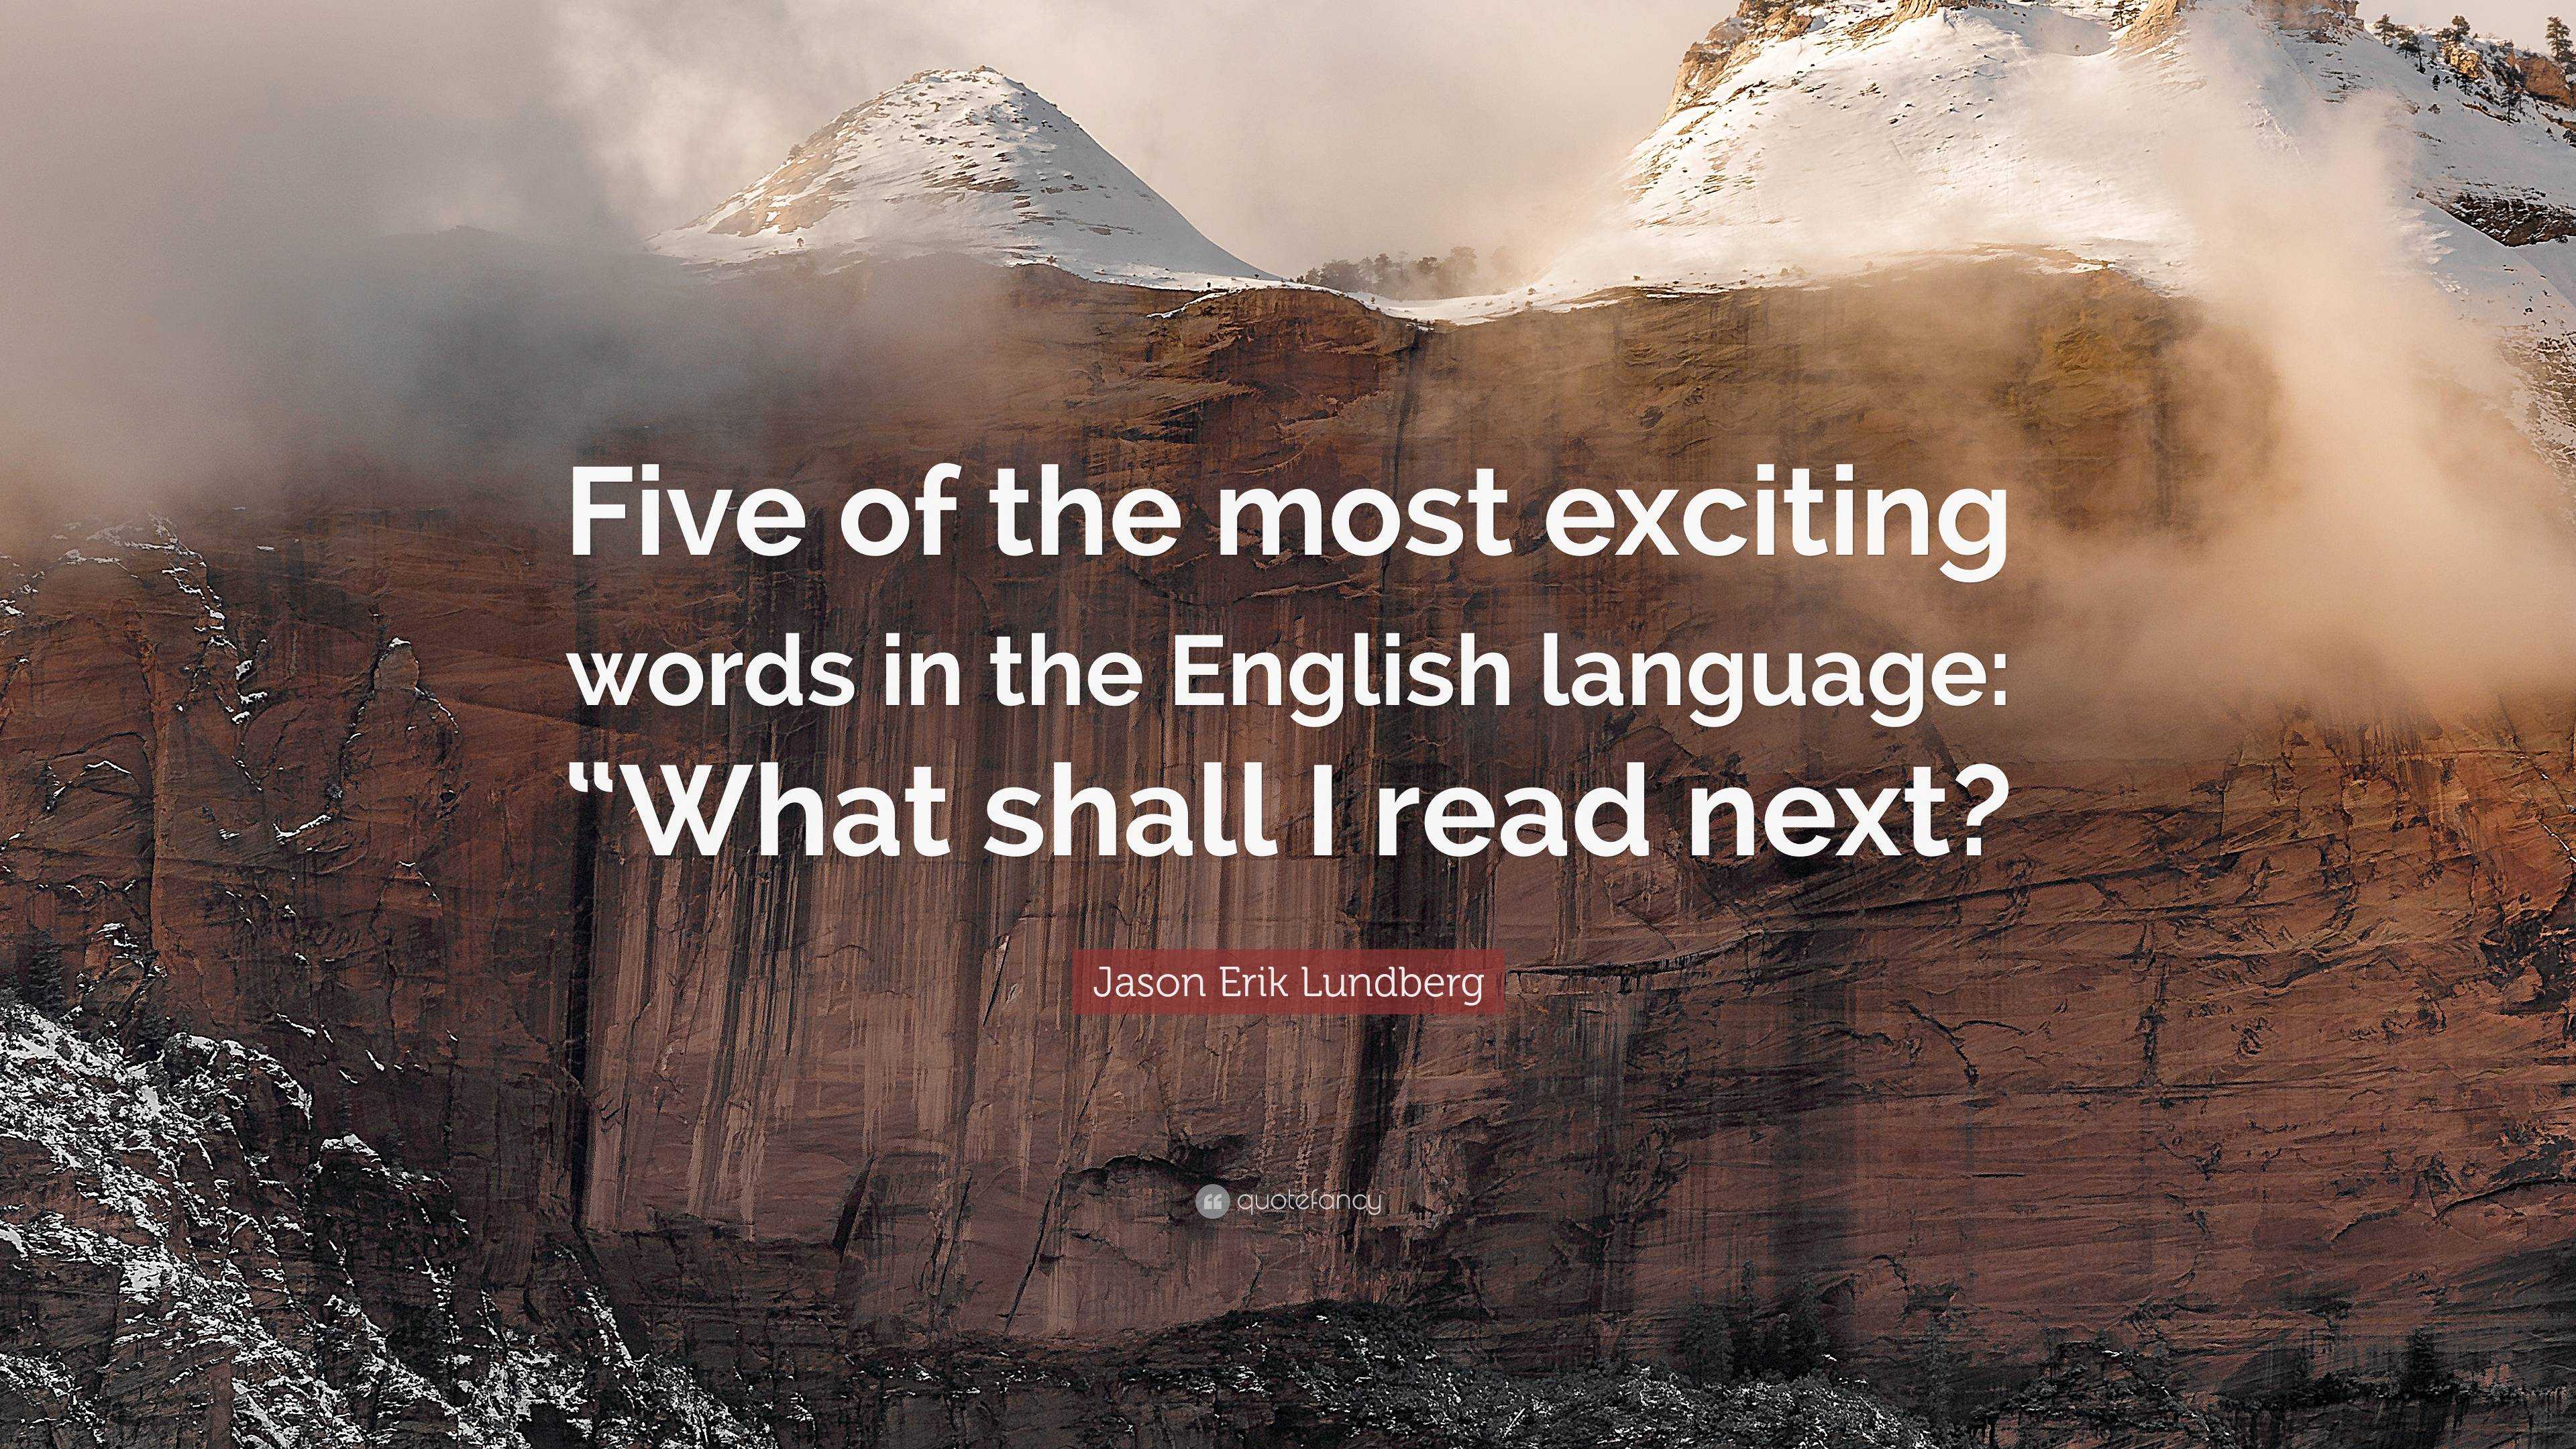 Jason Erik Lundberg Quote: “Five of the most exciting words in the ...